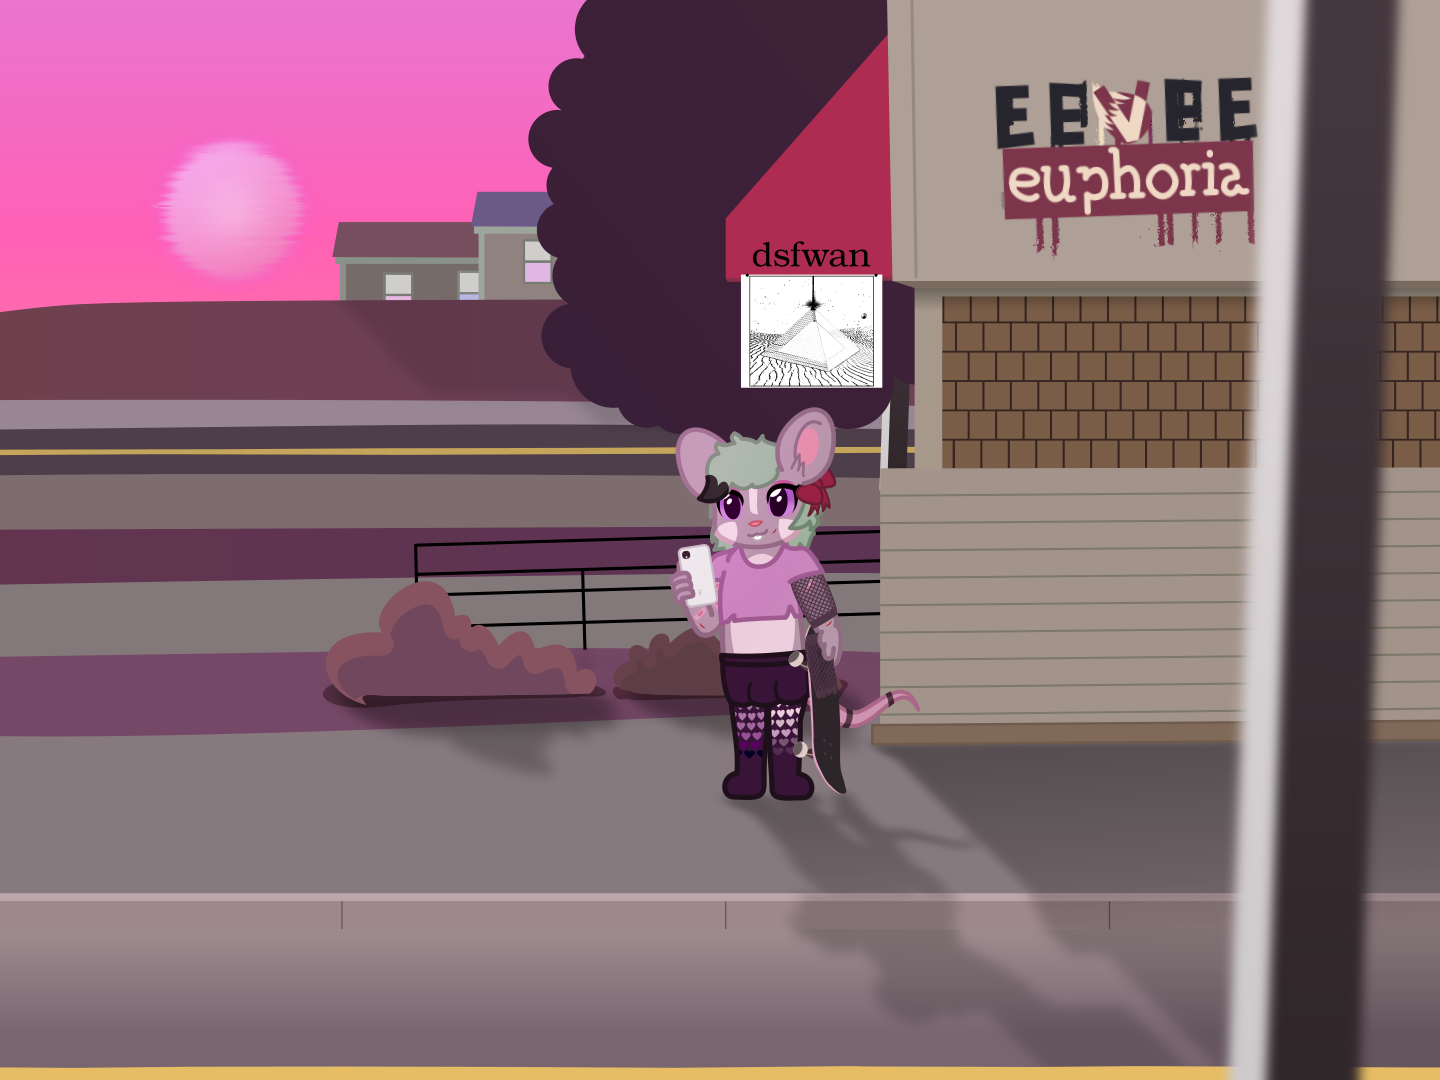 The same picture but without the text conversation. The background is a small part of a city, with purple hills and grass, and Ky is stood in front of a store that just reads 'dsfwan', and has abstract art hanging from it's sign.